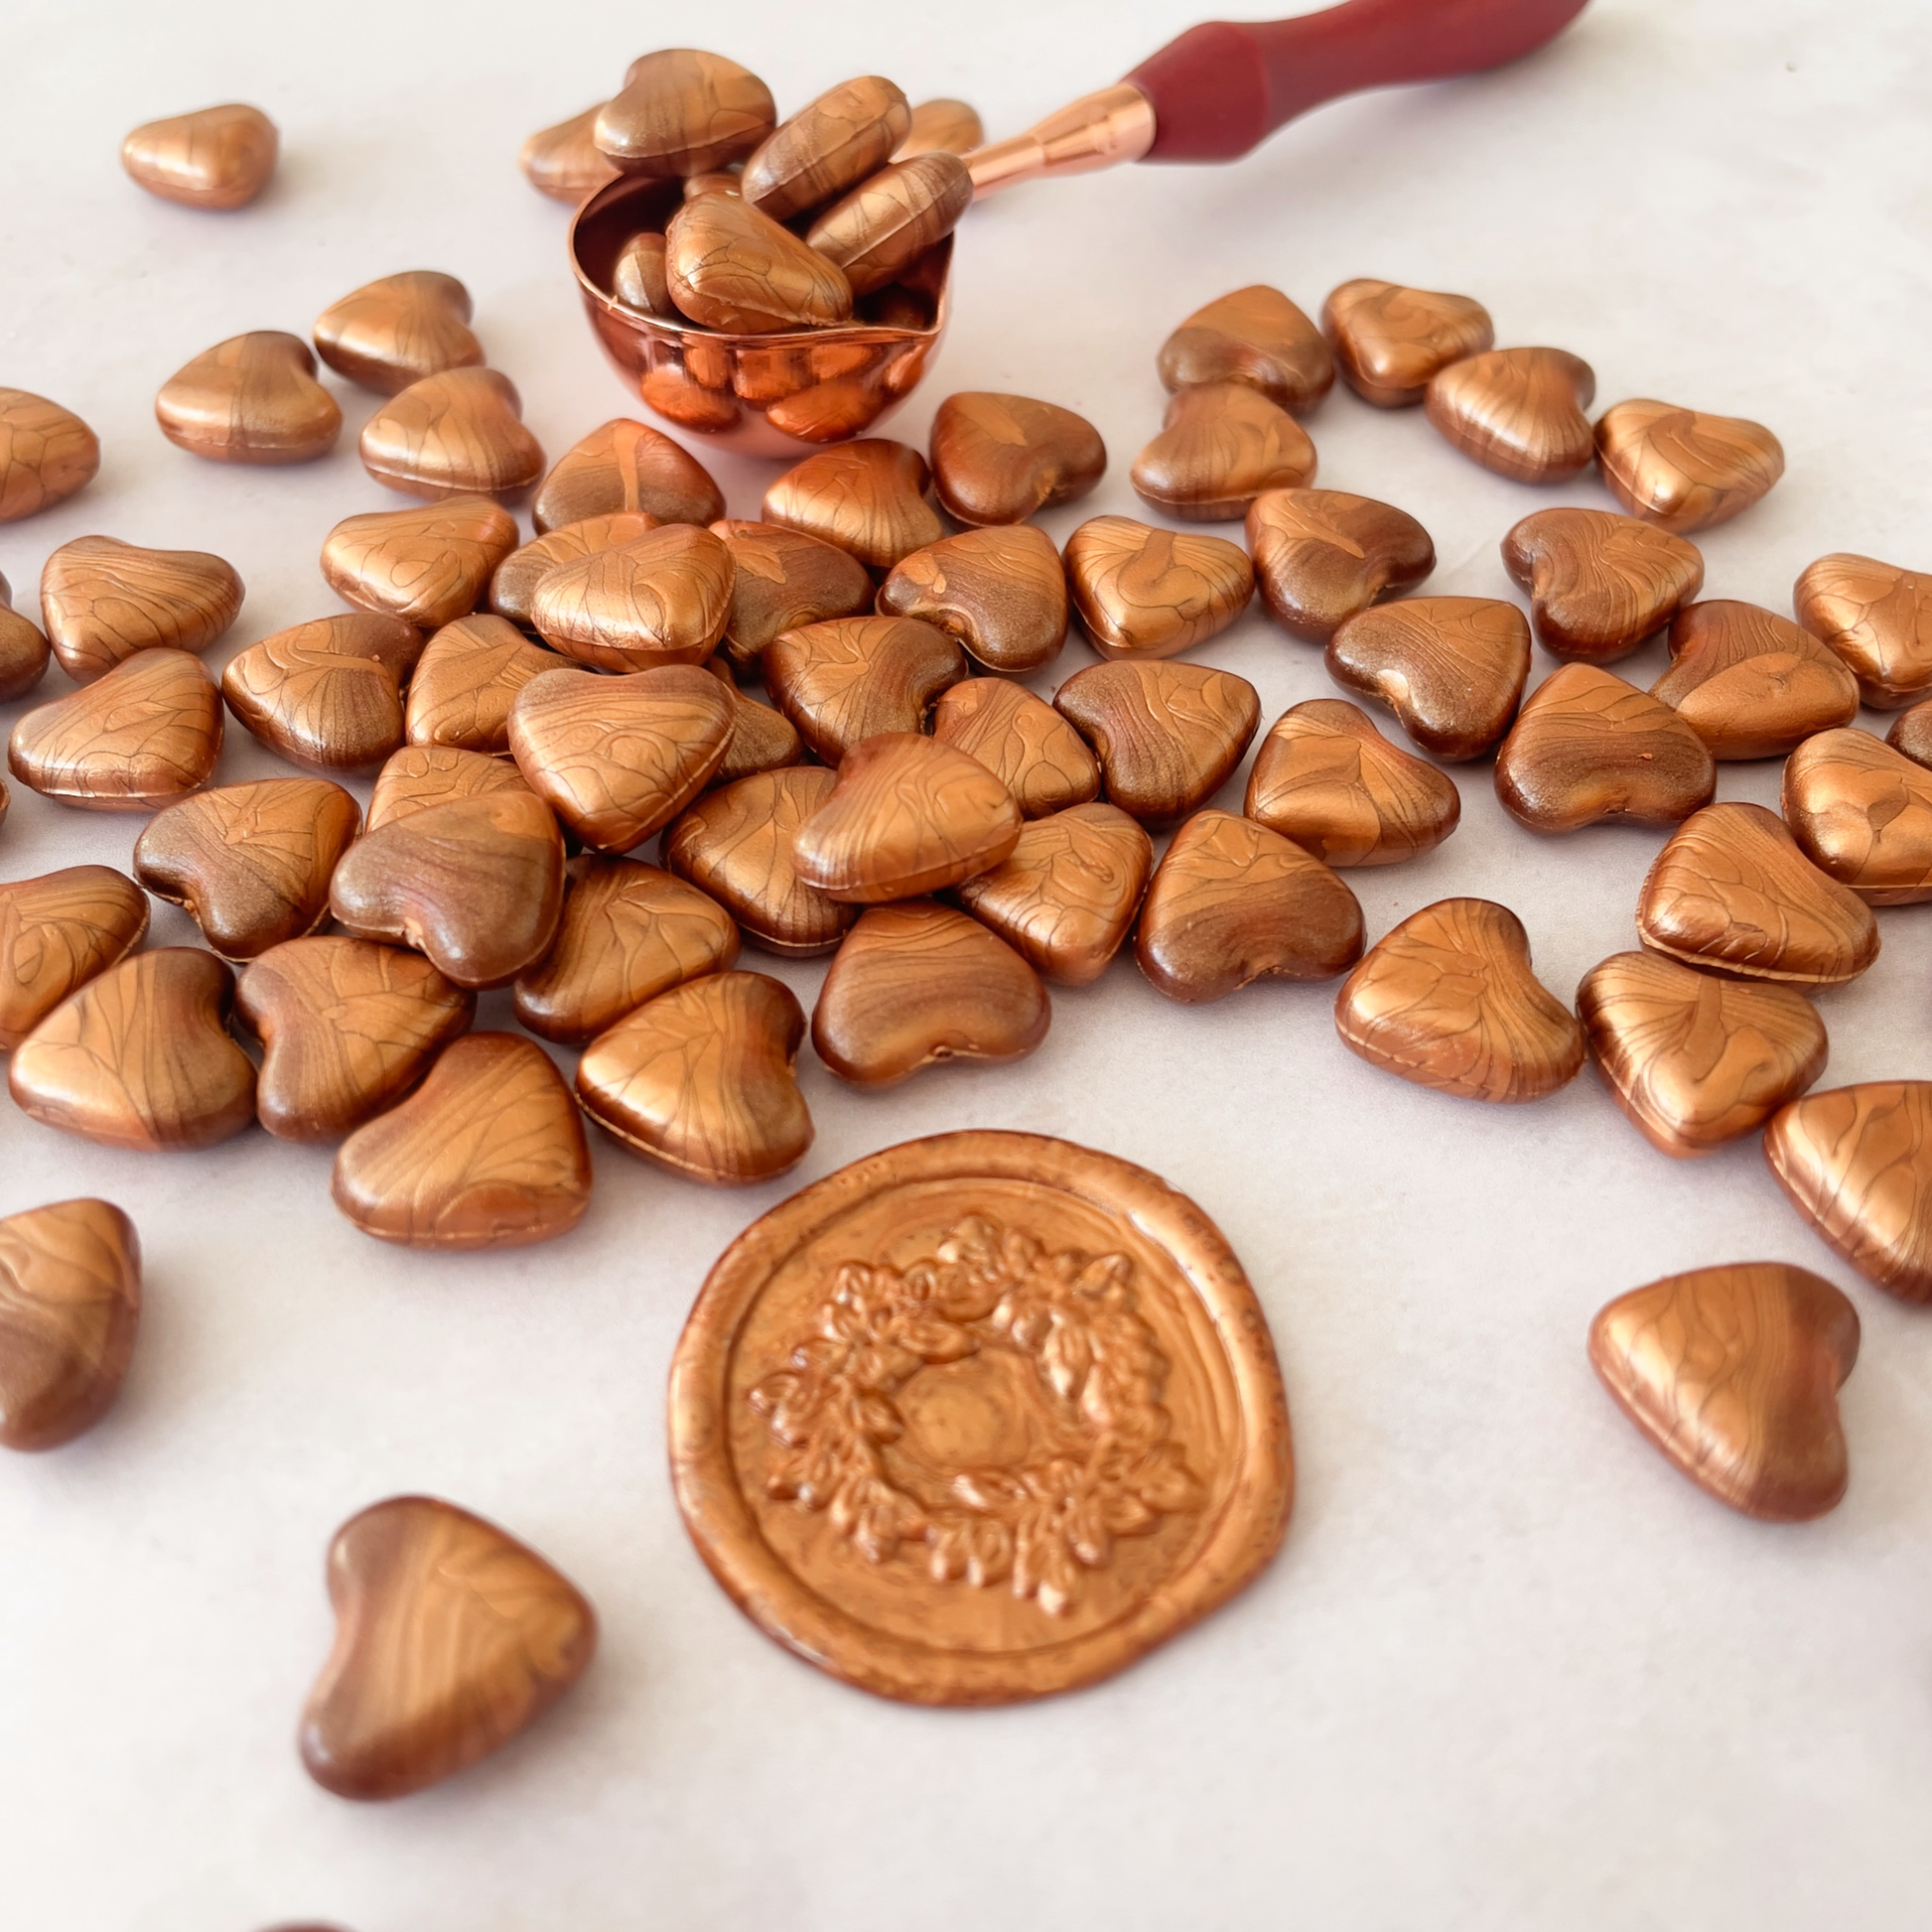 copper wax seal supplies.  Metallic copper wax beads to melt with a melting spoon.  Make envelope seals, wax seals and wax stamps in copper colour